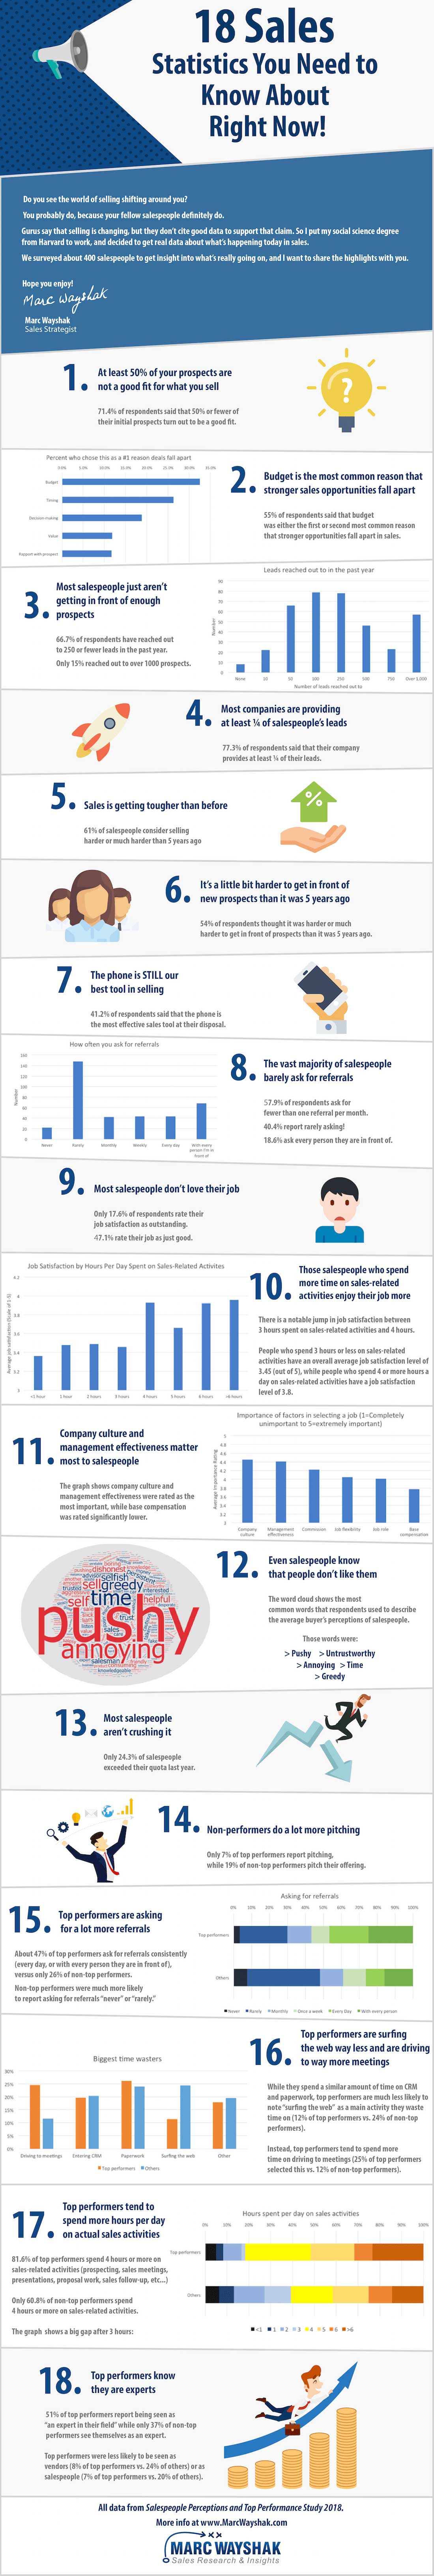 18 New Sales Statistics from 2018 Groundbreaking Study! [INFOGRAPHIC]